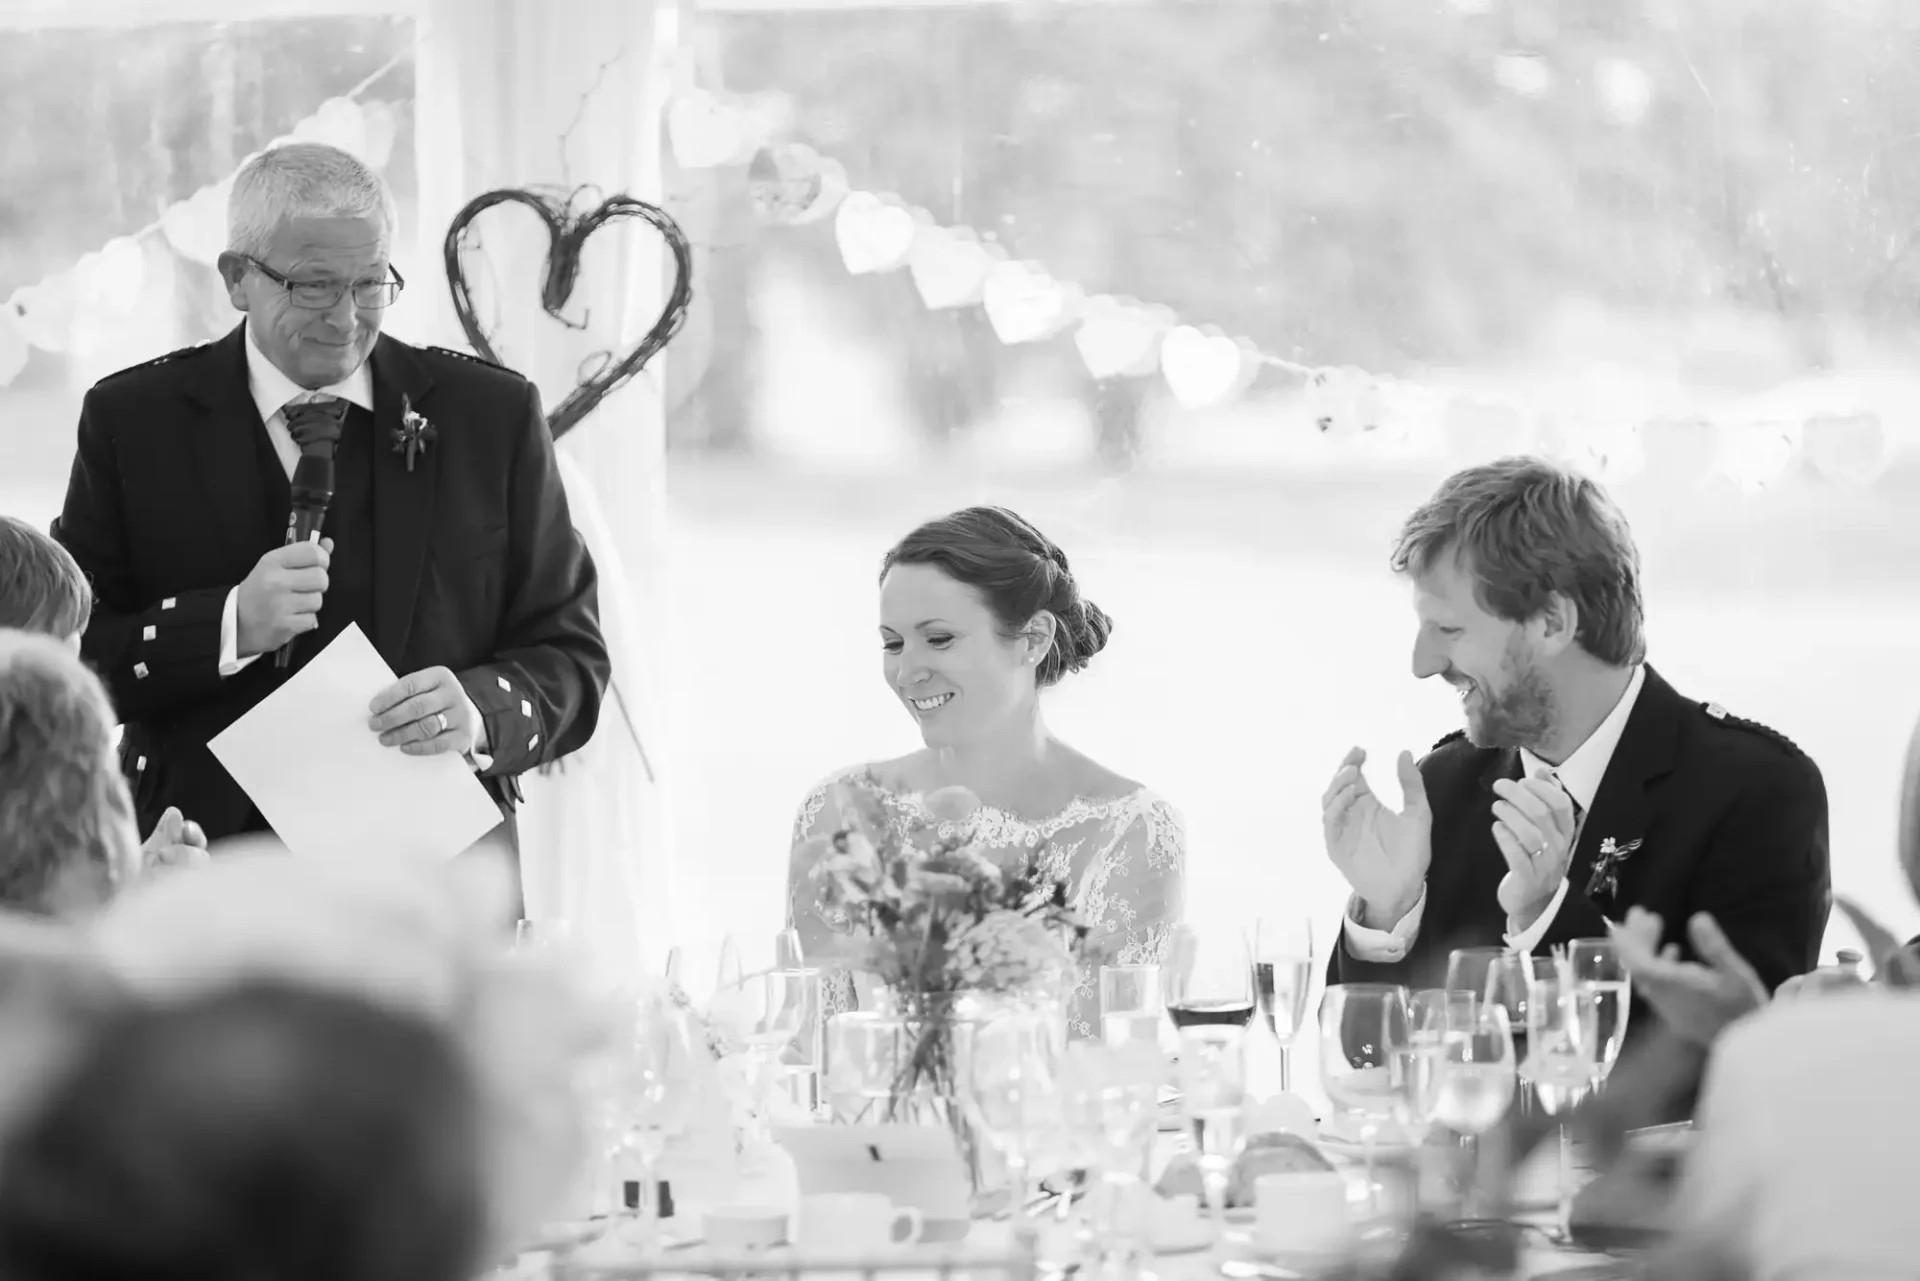 A black and white photo of a wedding reception where an older man is giving a speech, and a laughing couple is listening, seated at a decorated table.